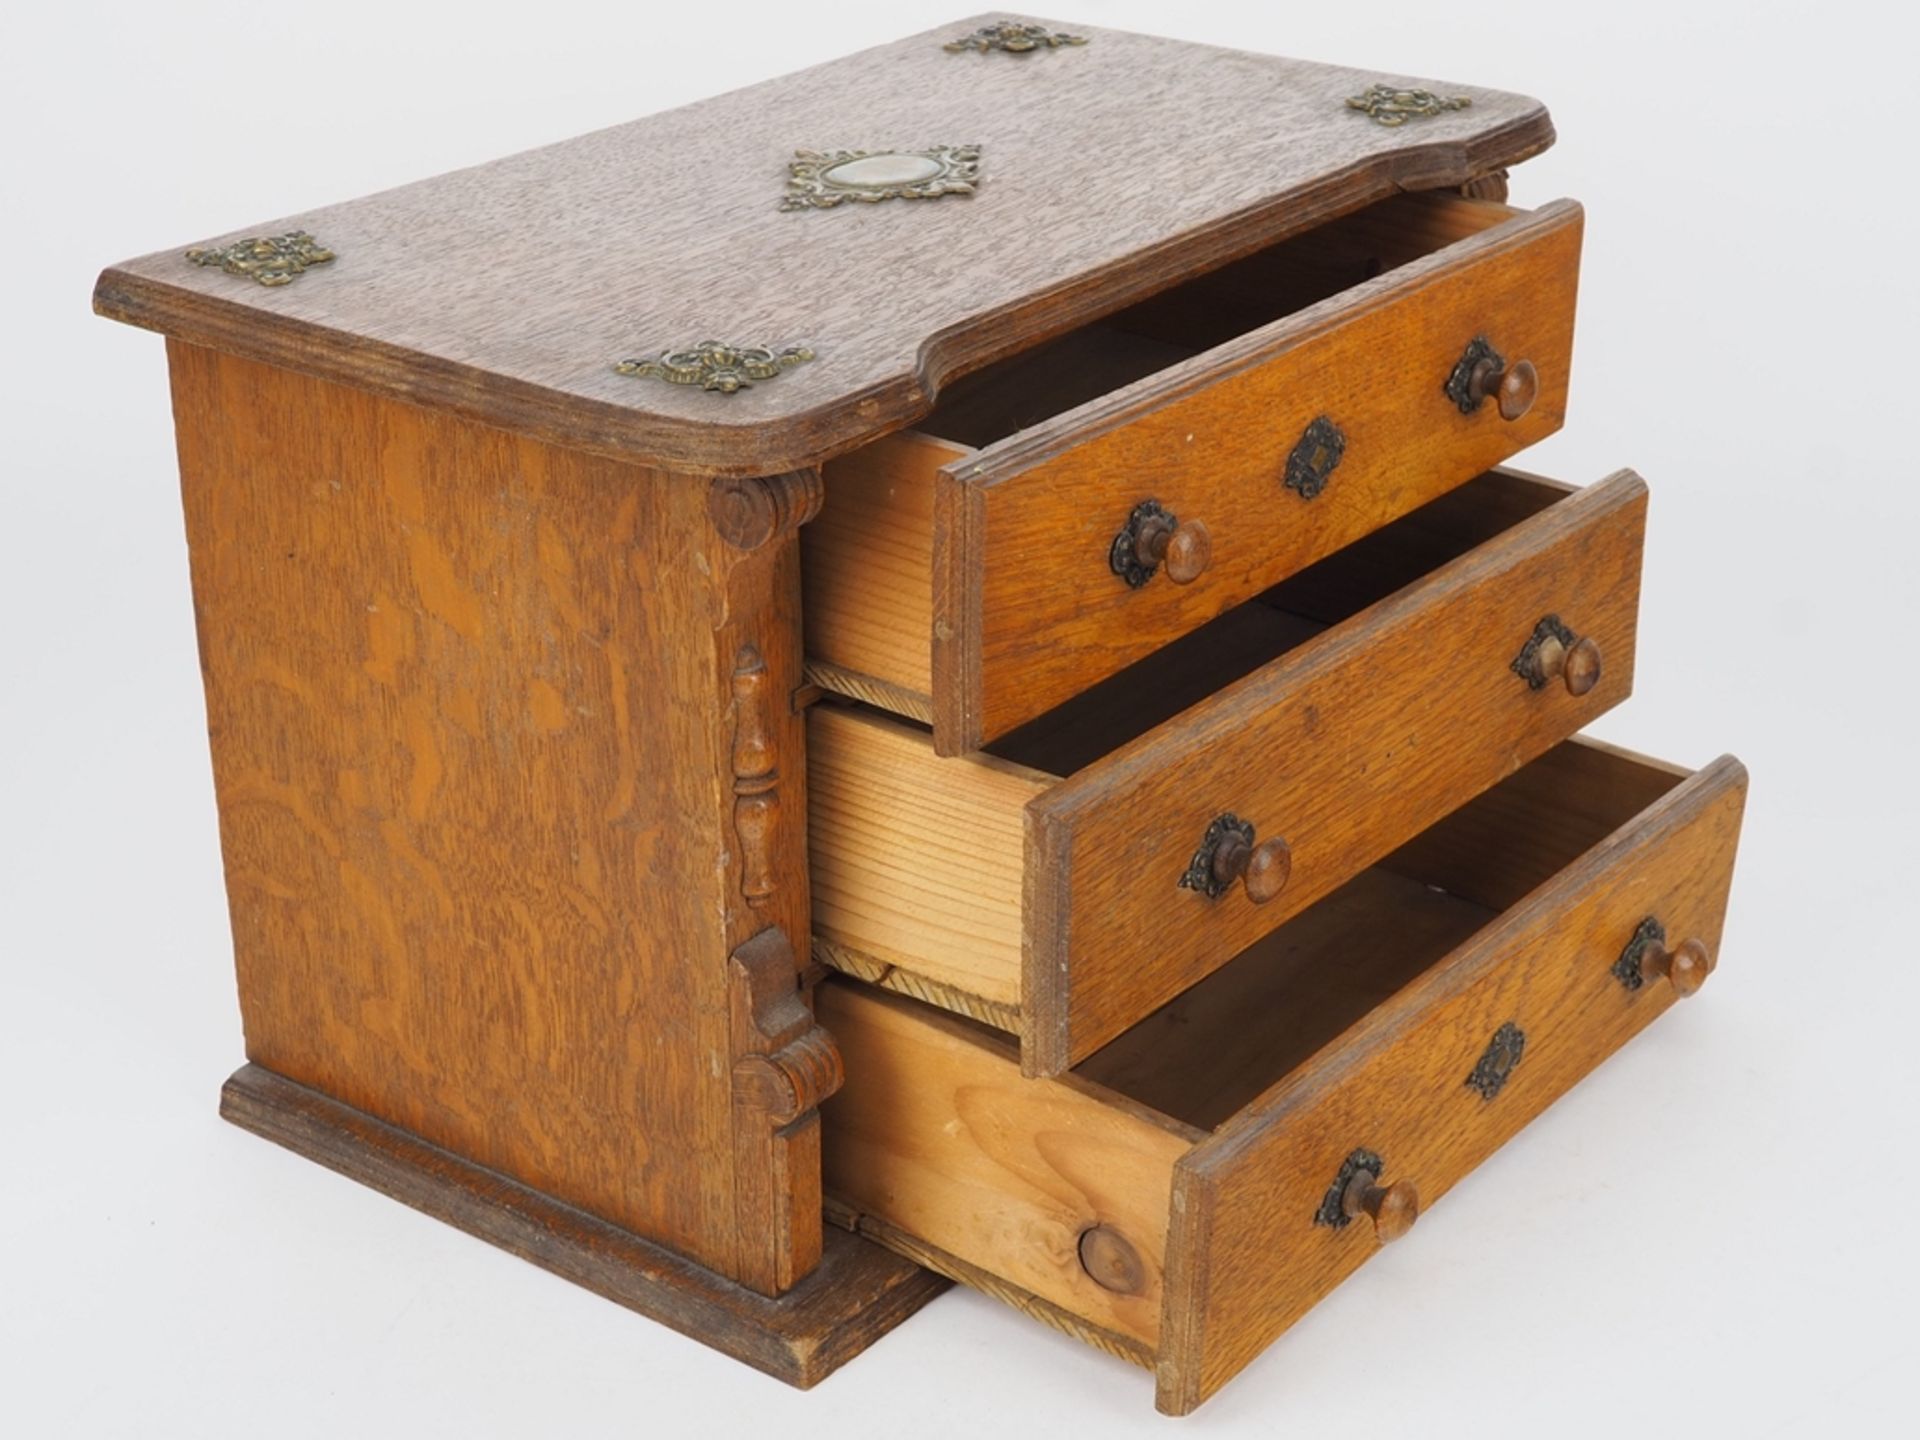 Model chest of drawers around 1880 - Image 2 of 3